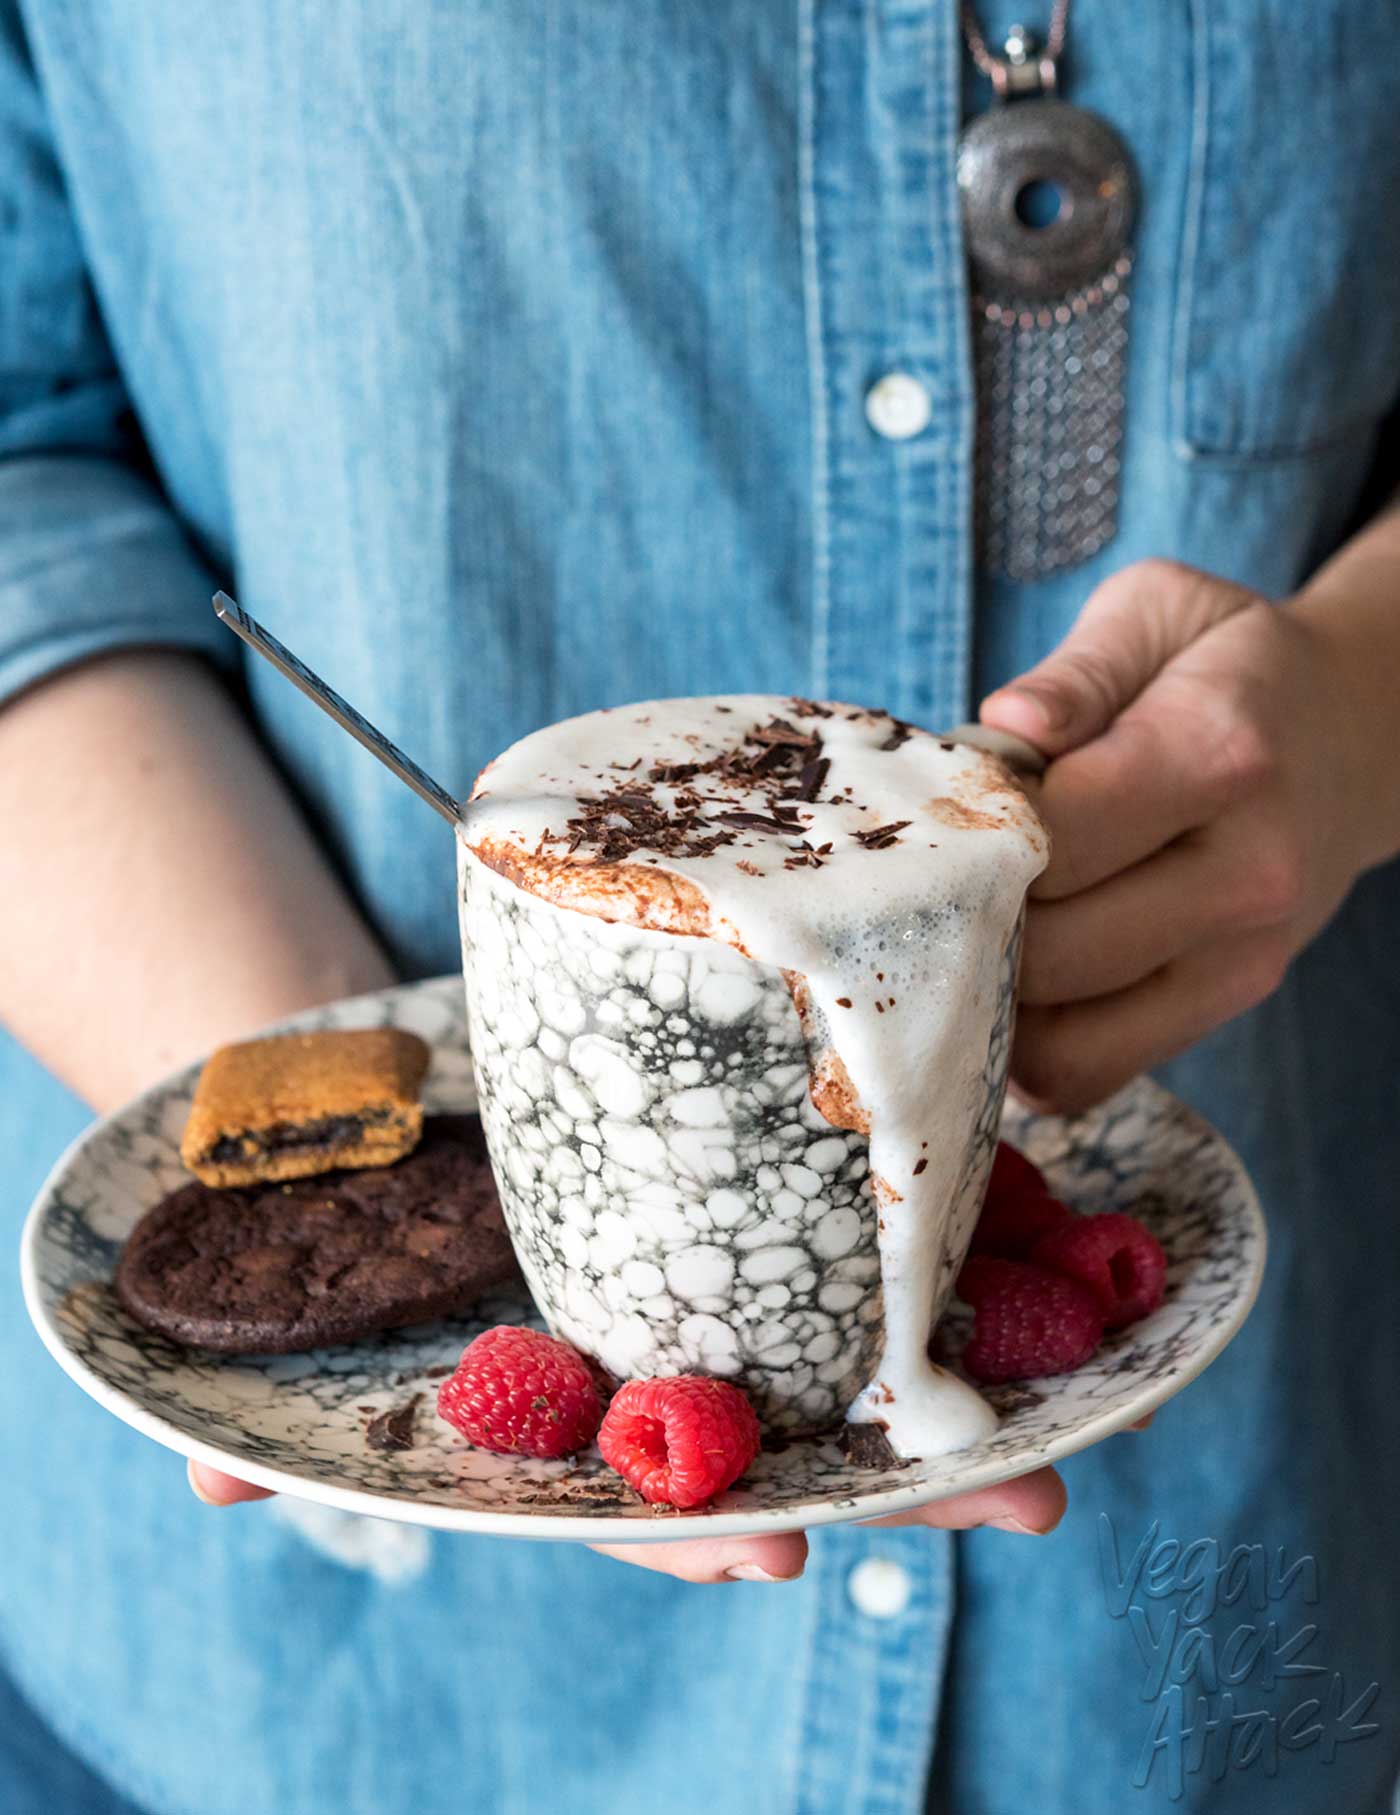 If you’re looking for the perfect, warming beverage for cool, winter nights, look no further than this dairy-free, sugar-free Raspberry Hot Cocoa! #vegan #lenoxusa #healthy #soyfree